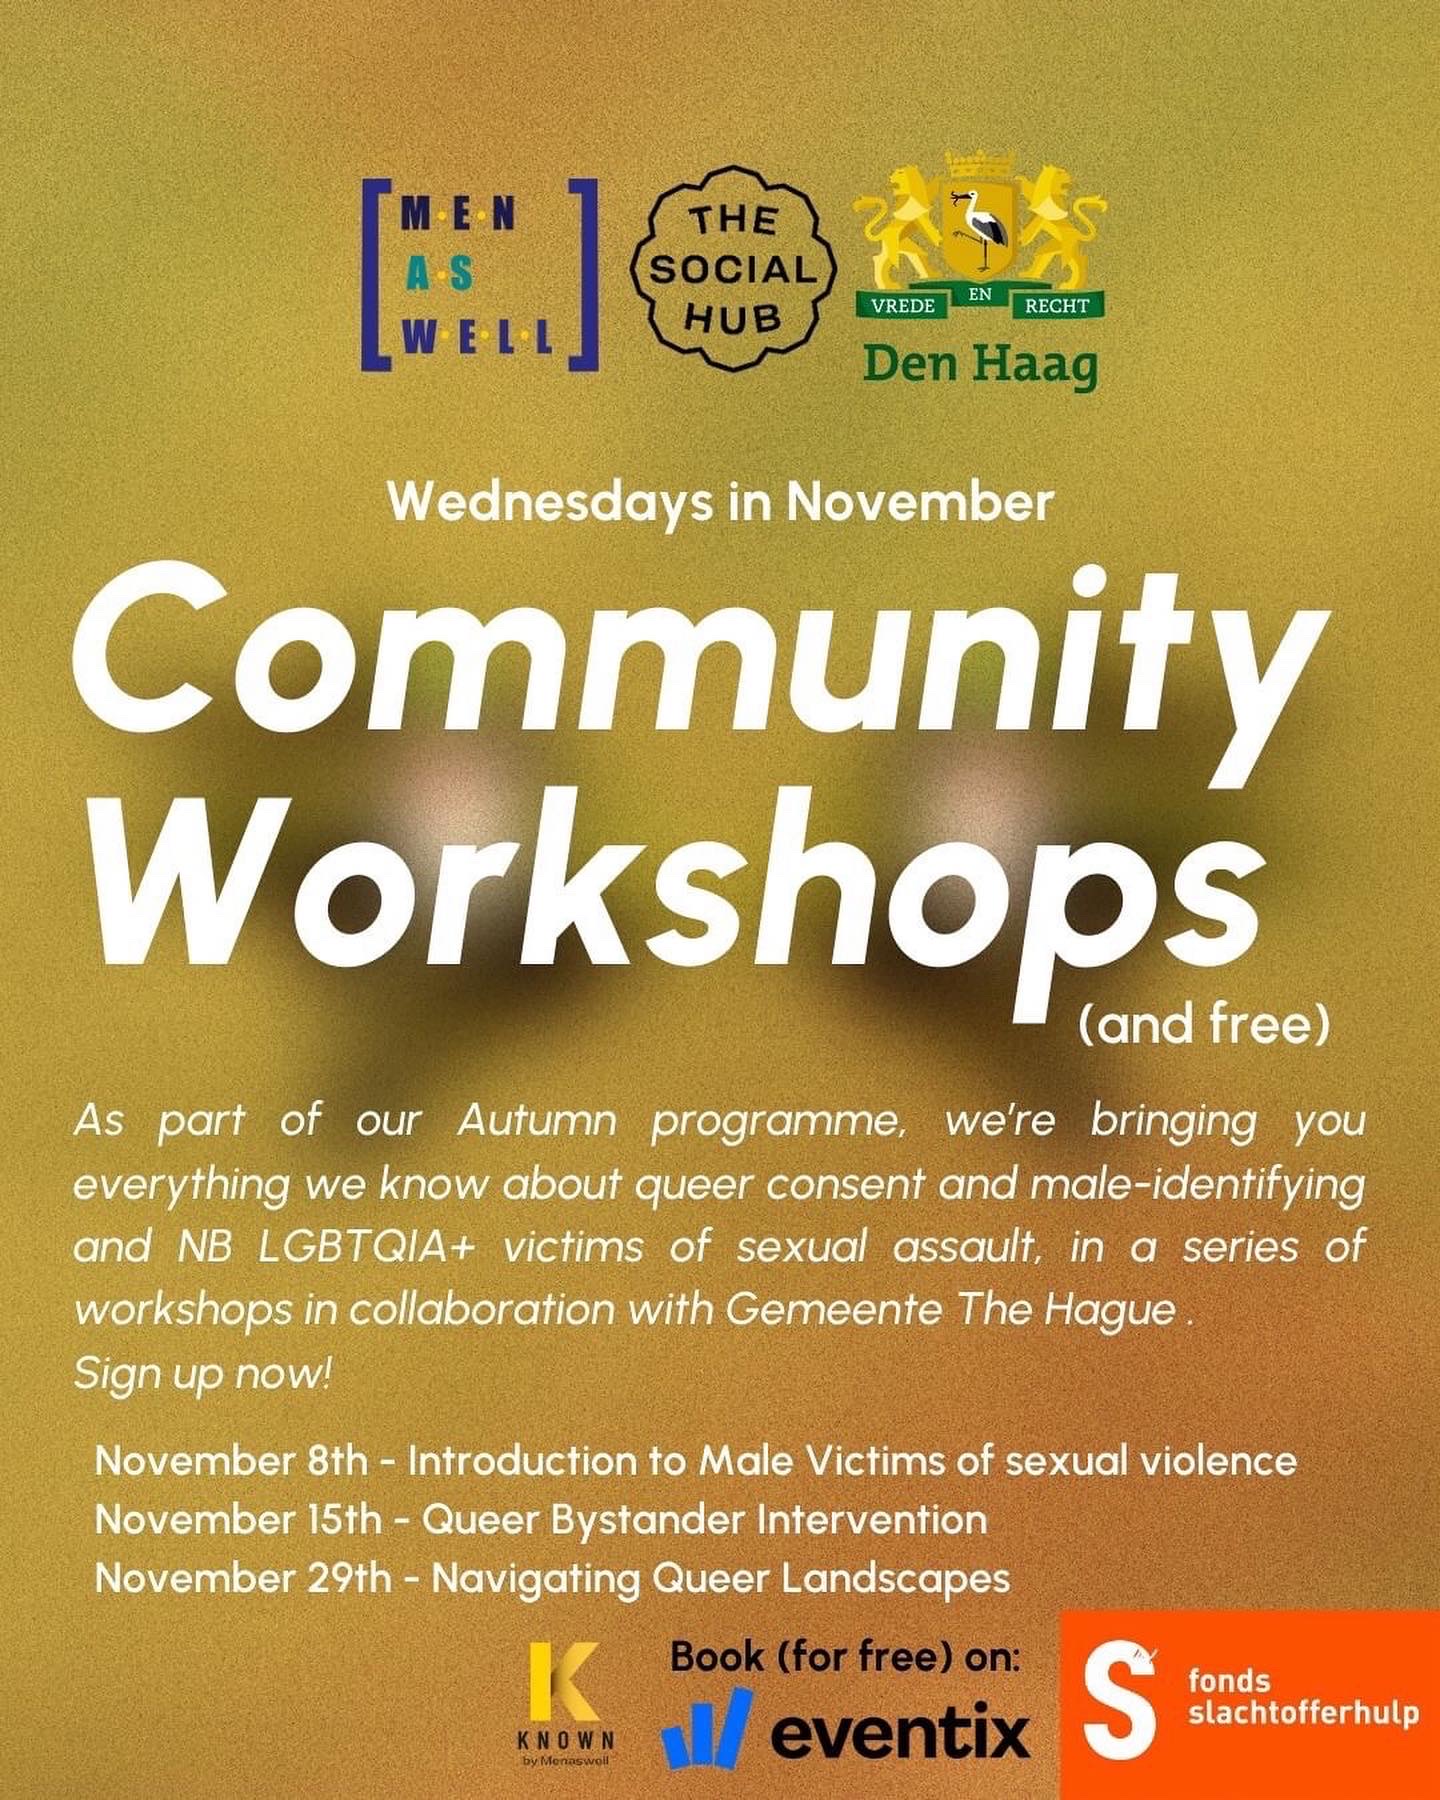 Flyer community workshops with dates, venue and logo's from, amongst others, MenAsWell, the municipality of The Hague, the Social Hub the Hague, and the fund for help to victims, Fonds Slachtofferhulp.